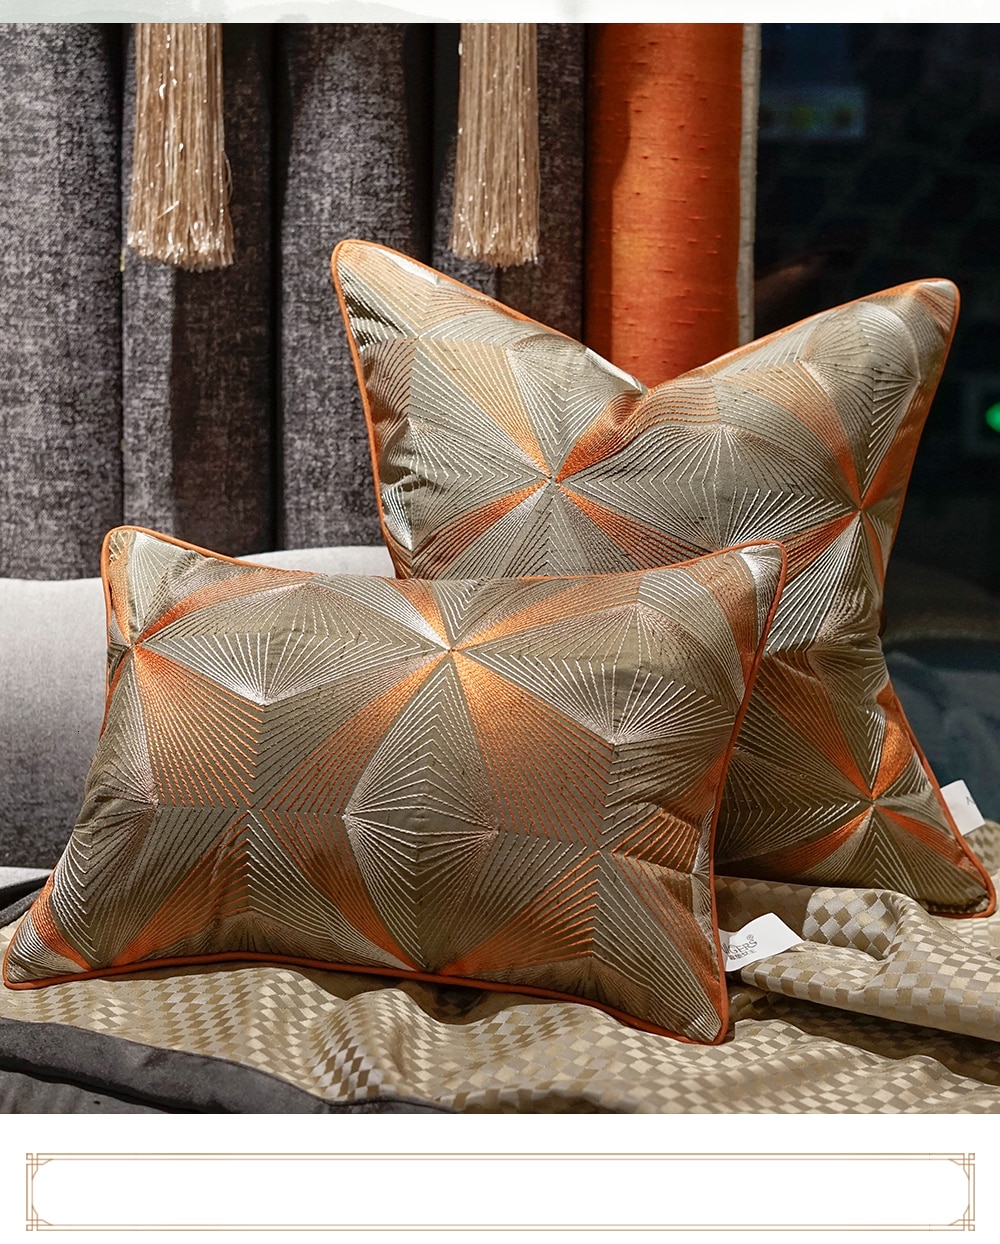 Avigers Luxury Home Decorative Orange Gray Cushion Covers Embroidery Throw Pillow Cases Square Customized 45 x 45 50 x 50cm